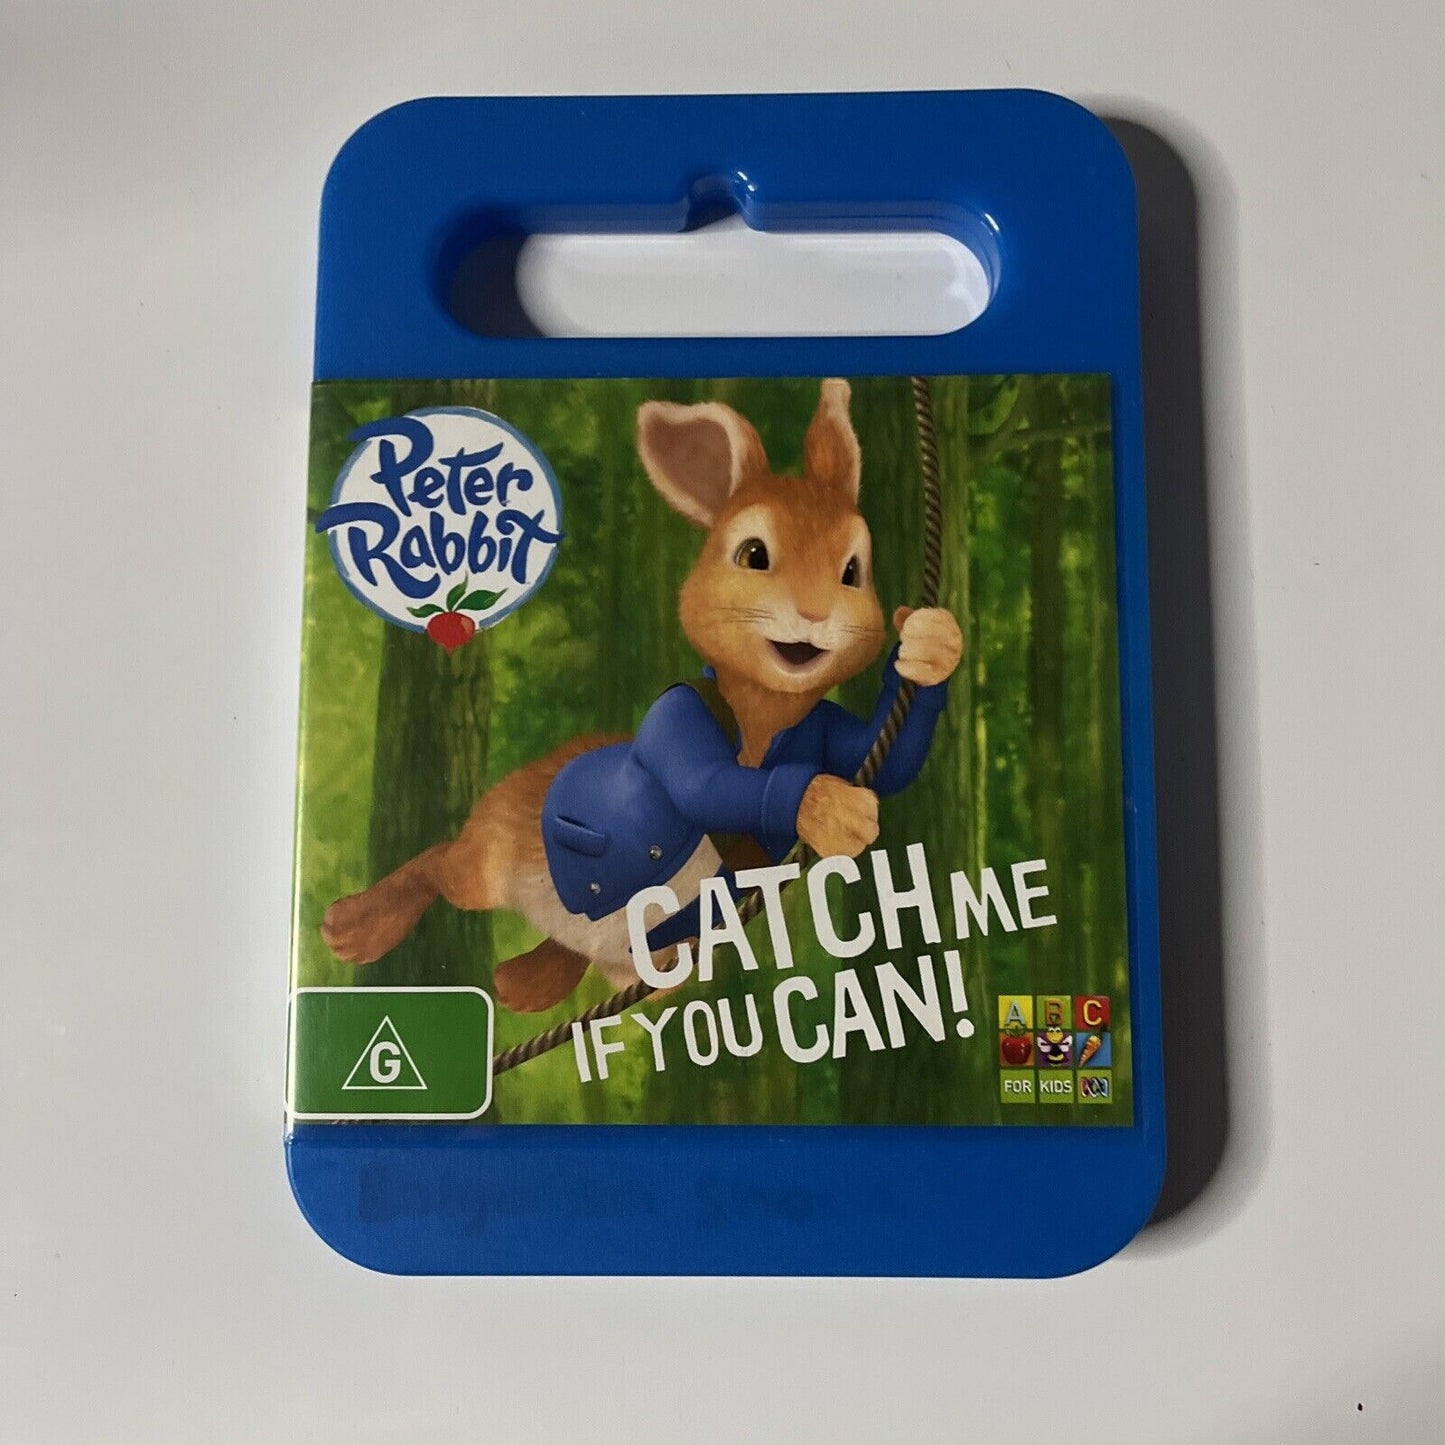 Peter Rabbit - Catch Me If You Can (DVD, 2014) Region 4